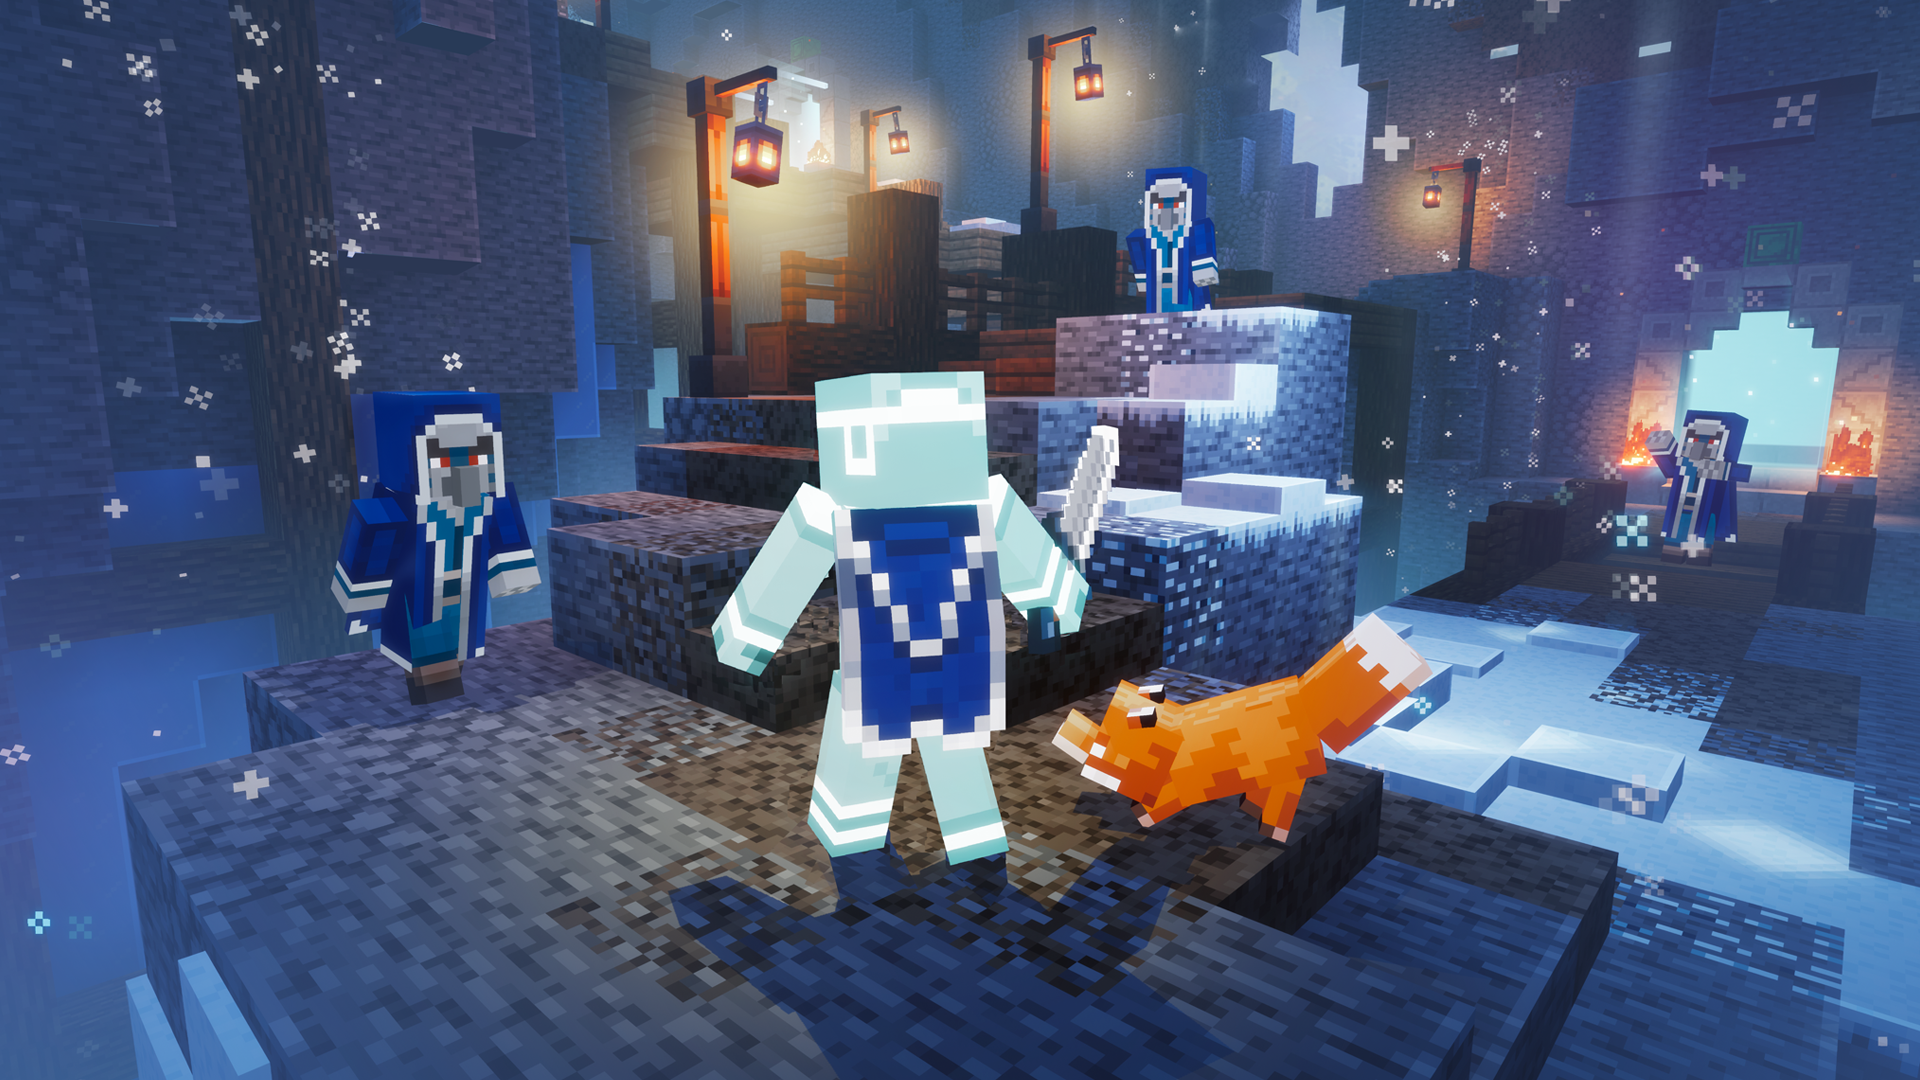 Video game screenshot of blocky human characters and a fox in a snowy environment